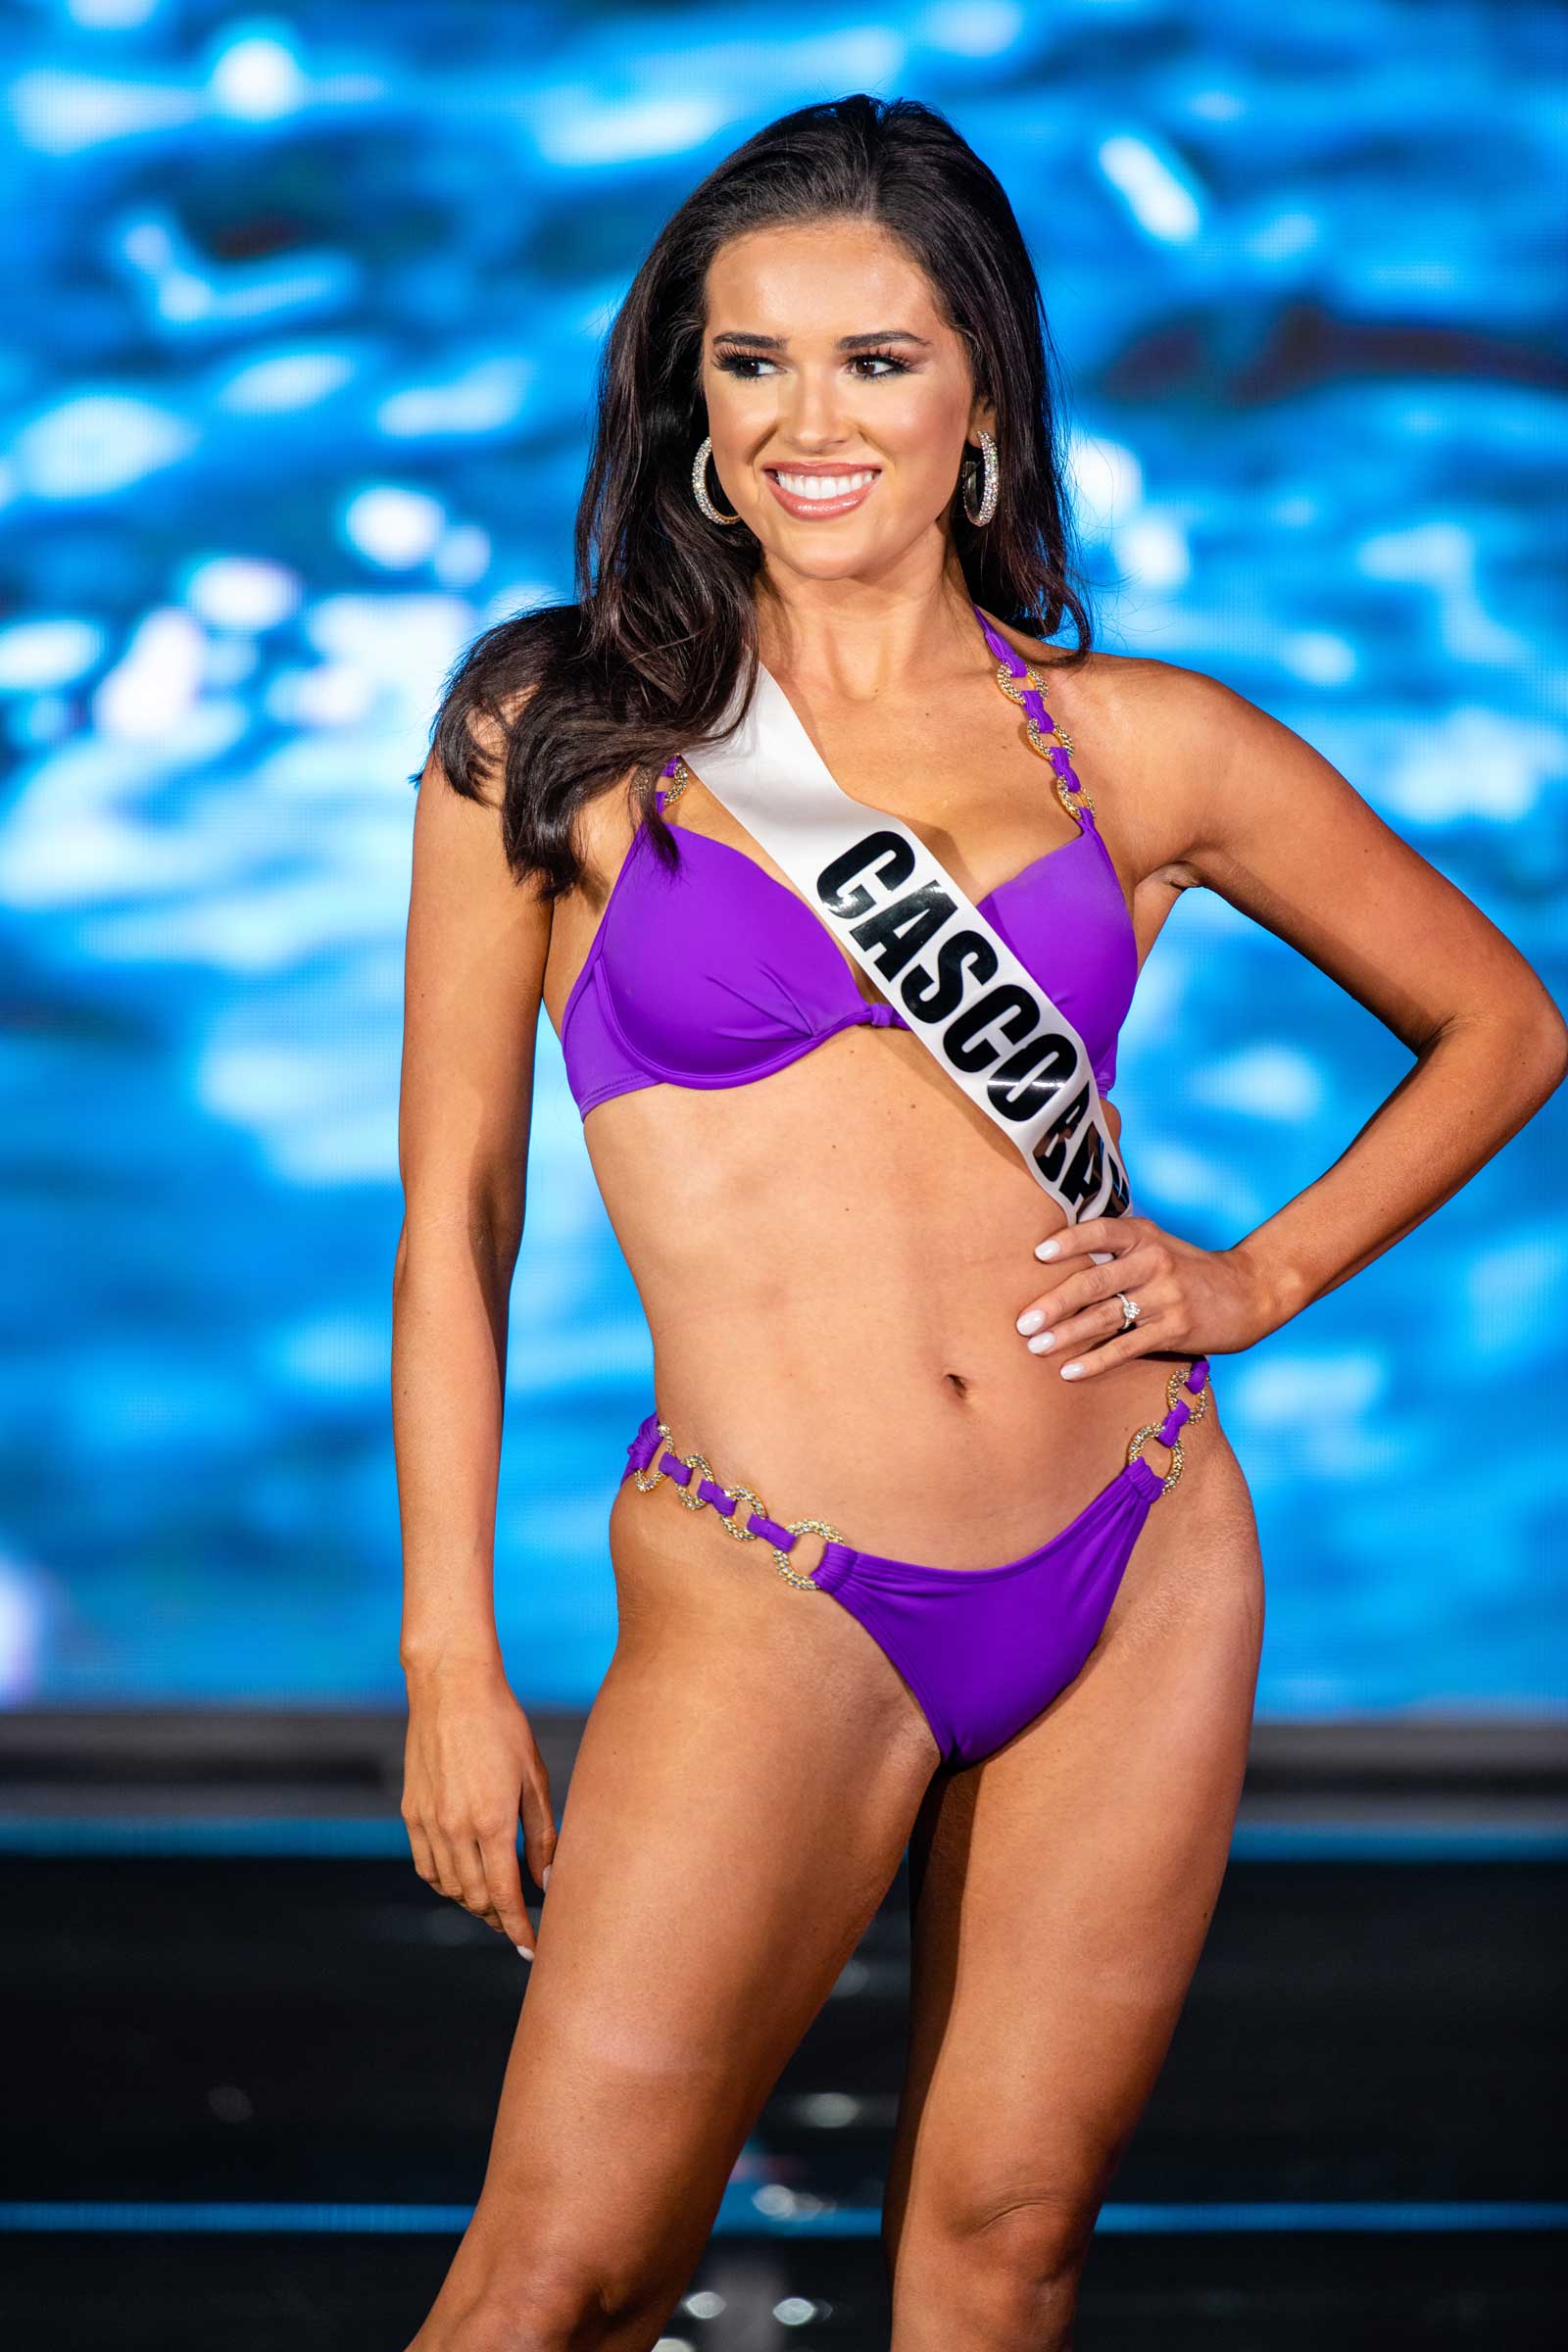 A woman competing in a swimsuit on stage